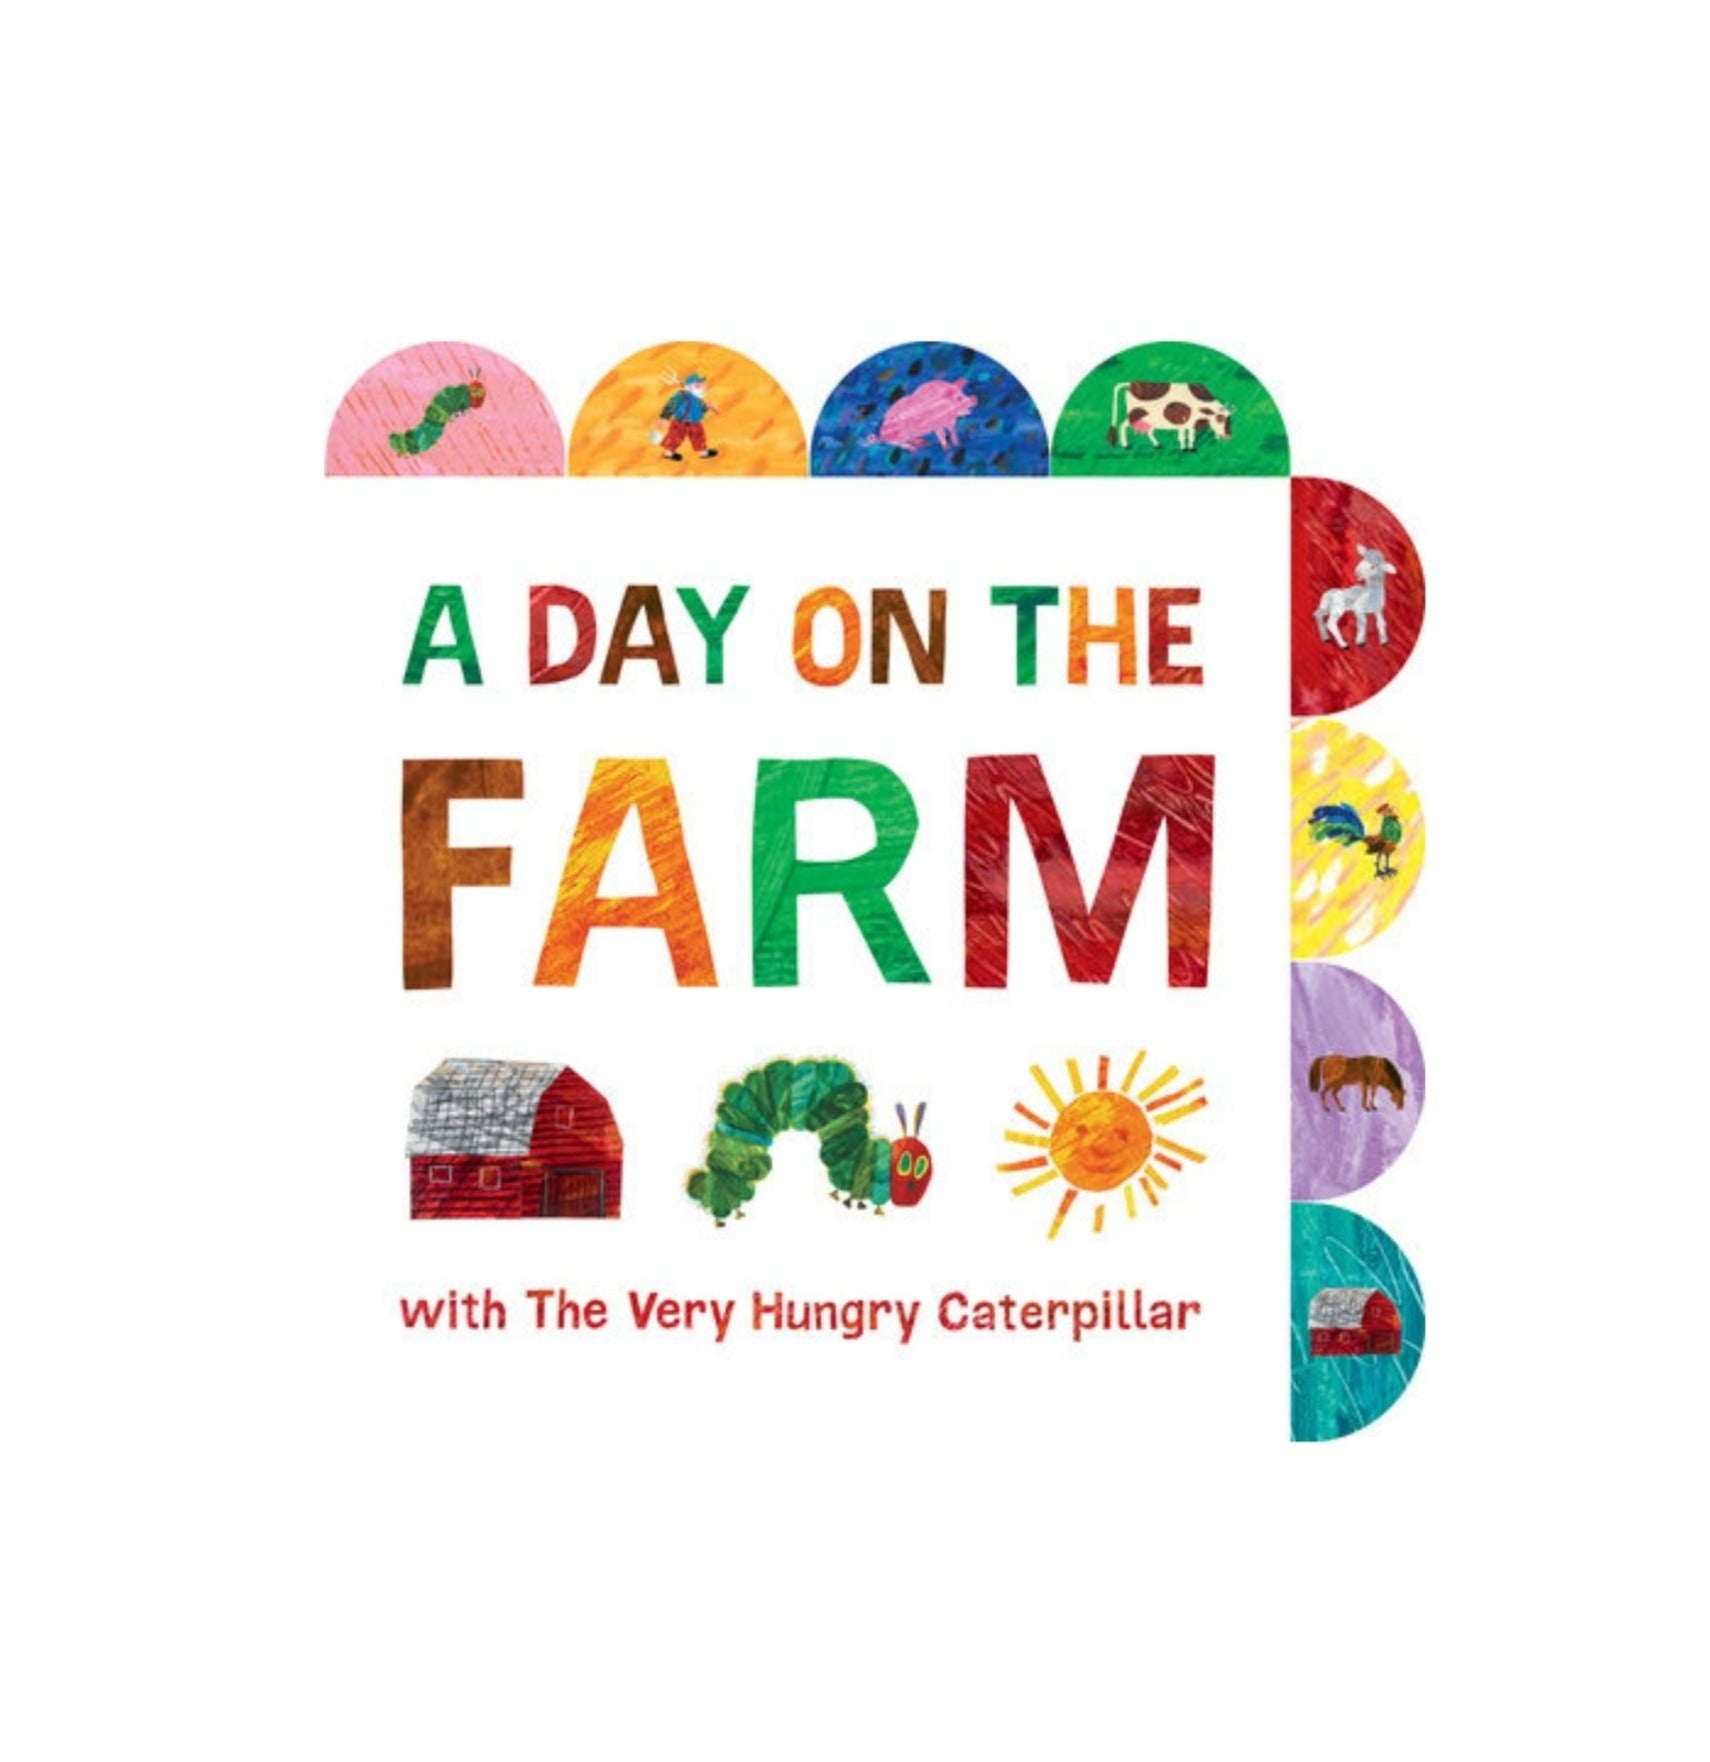 A day on the farm book cover showing all the different colorful tabs - Penguin Random House